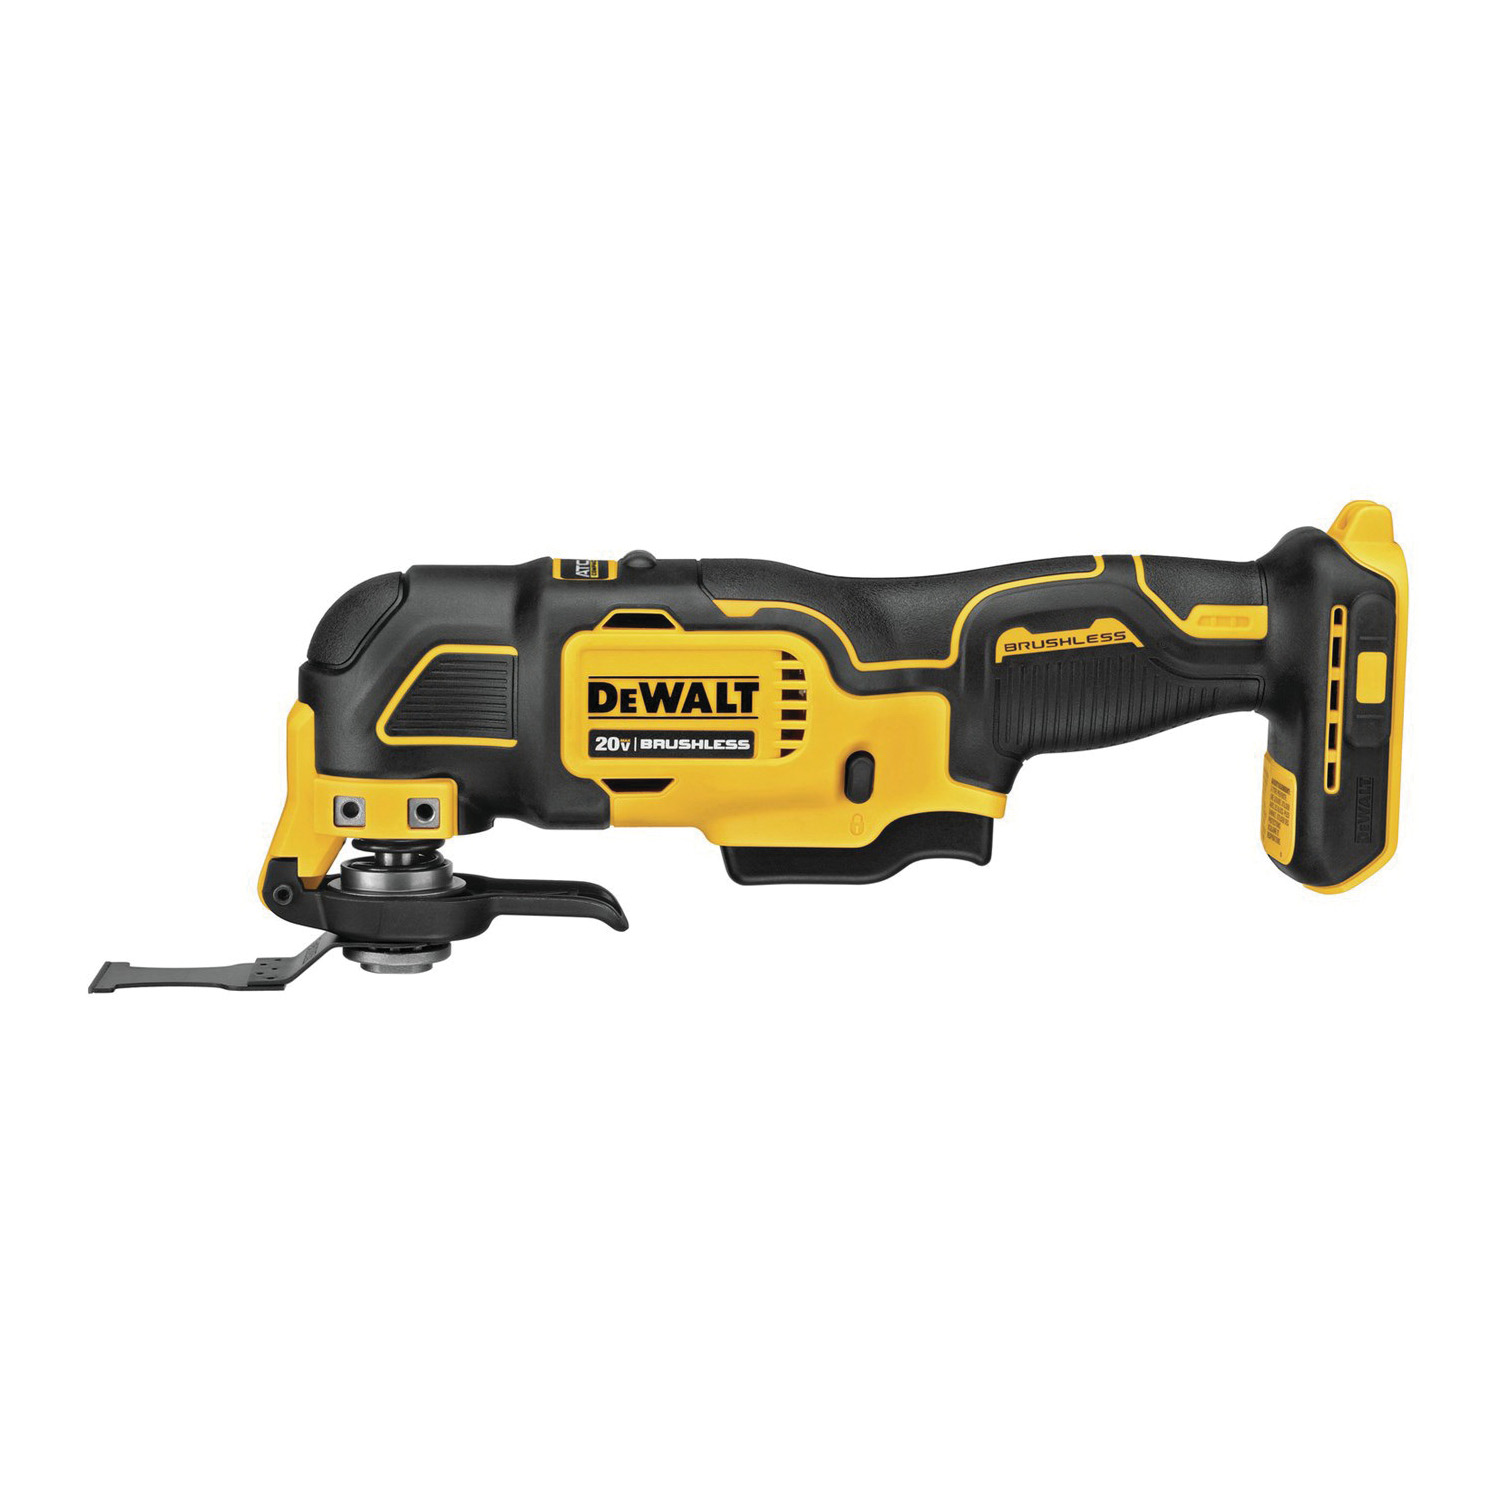 DCS354B Oscillating Tool, Tool Only, 20 V, 0 to 18,000 opm, 1.6 deg Oscillating, Variable Speed Control